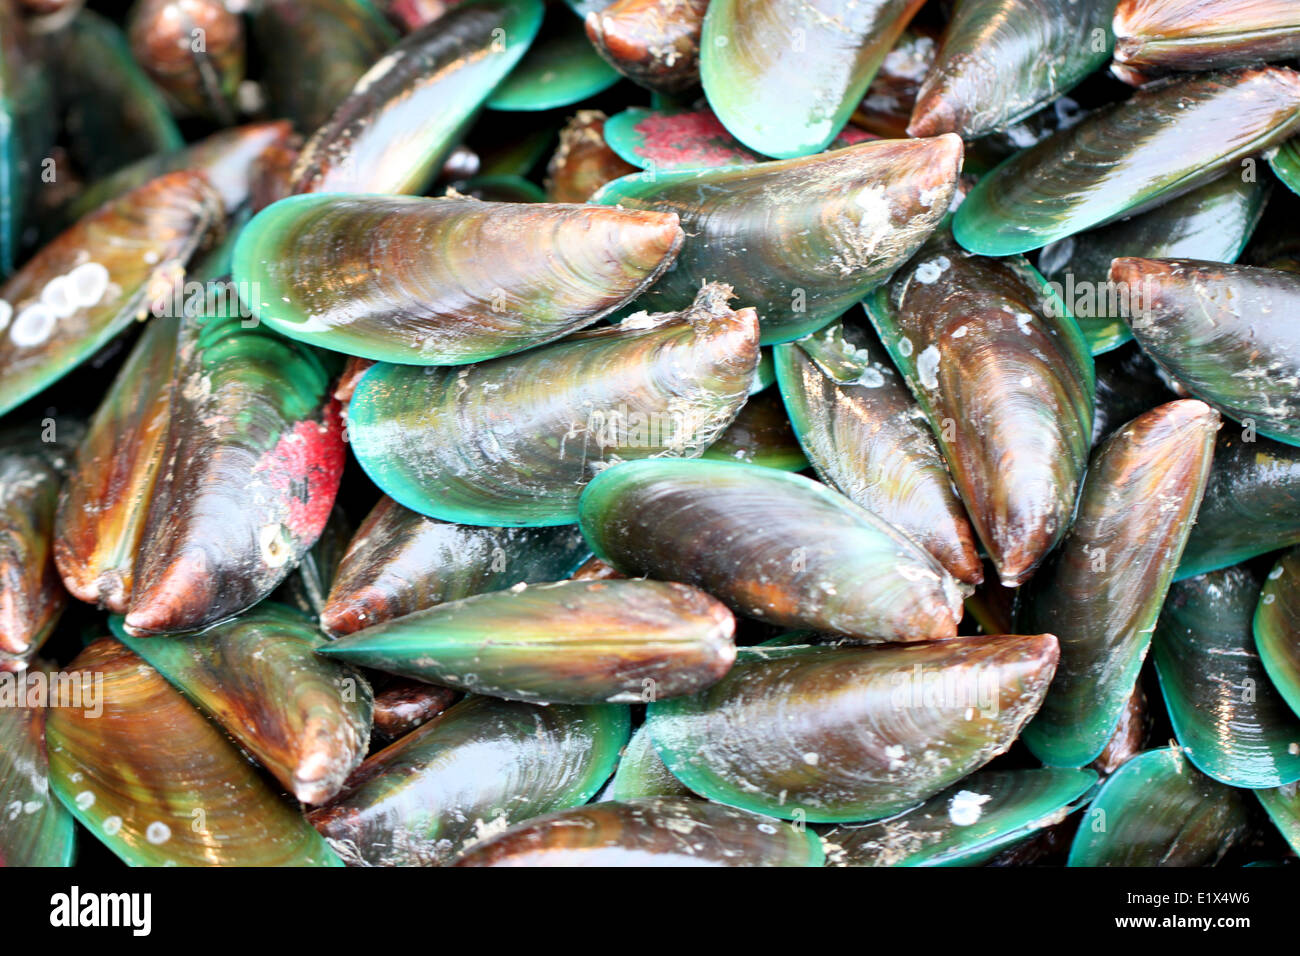 green mussel in seafood market for the background image. Stock Photo